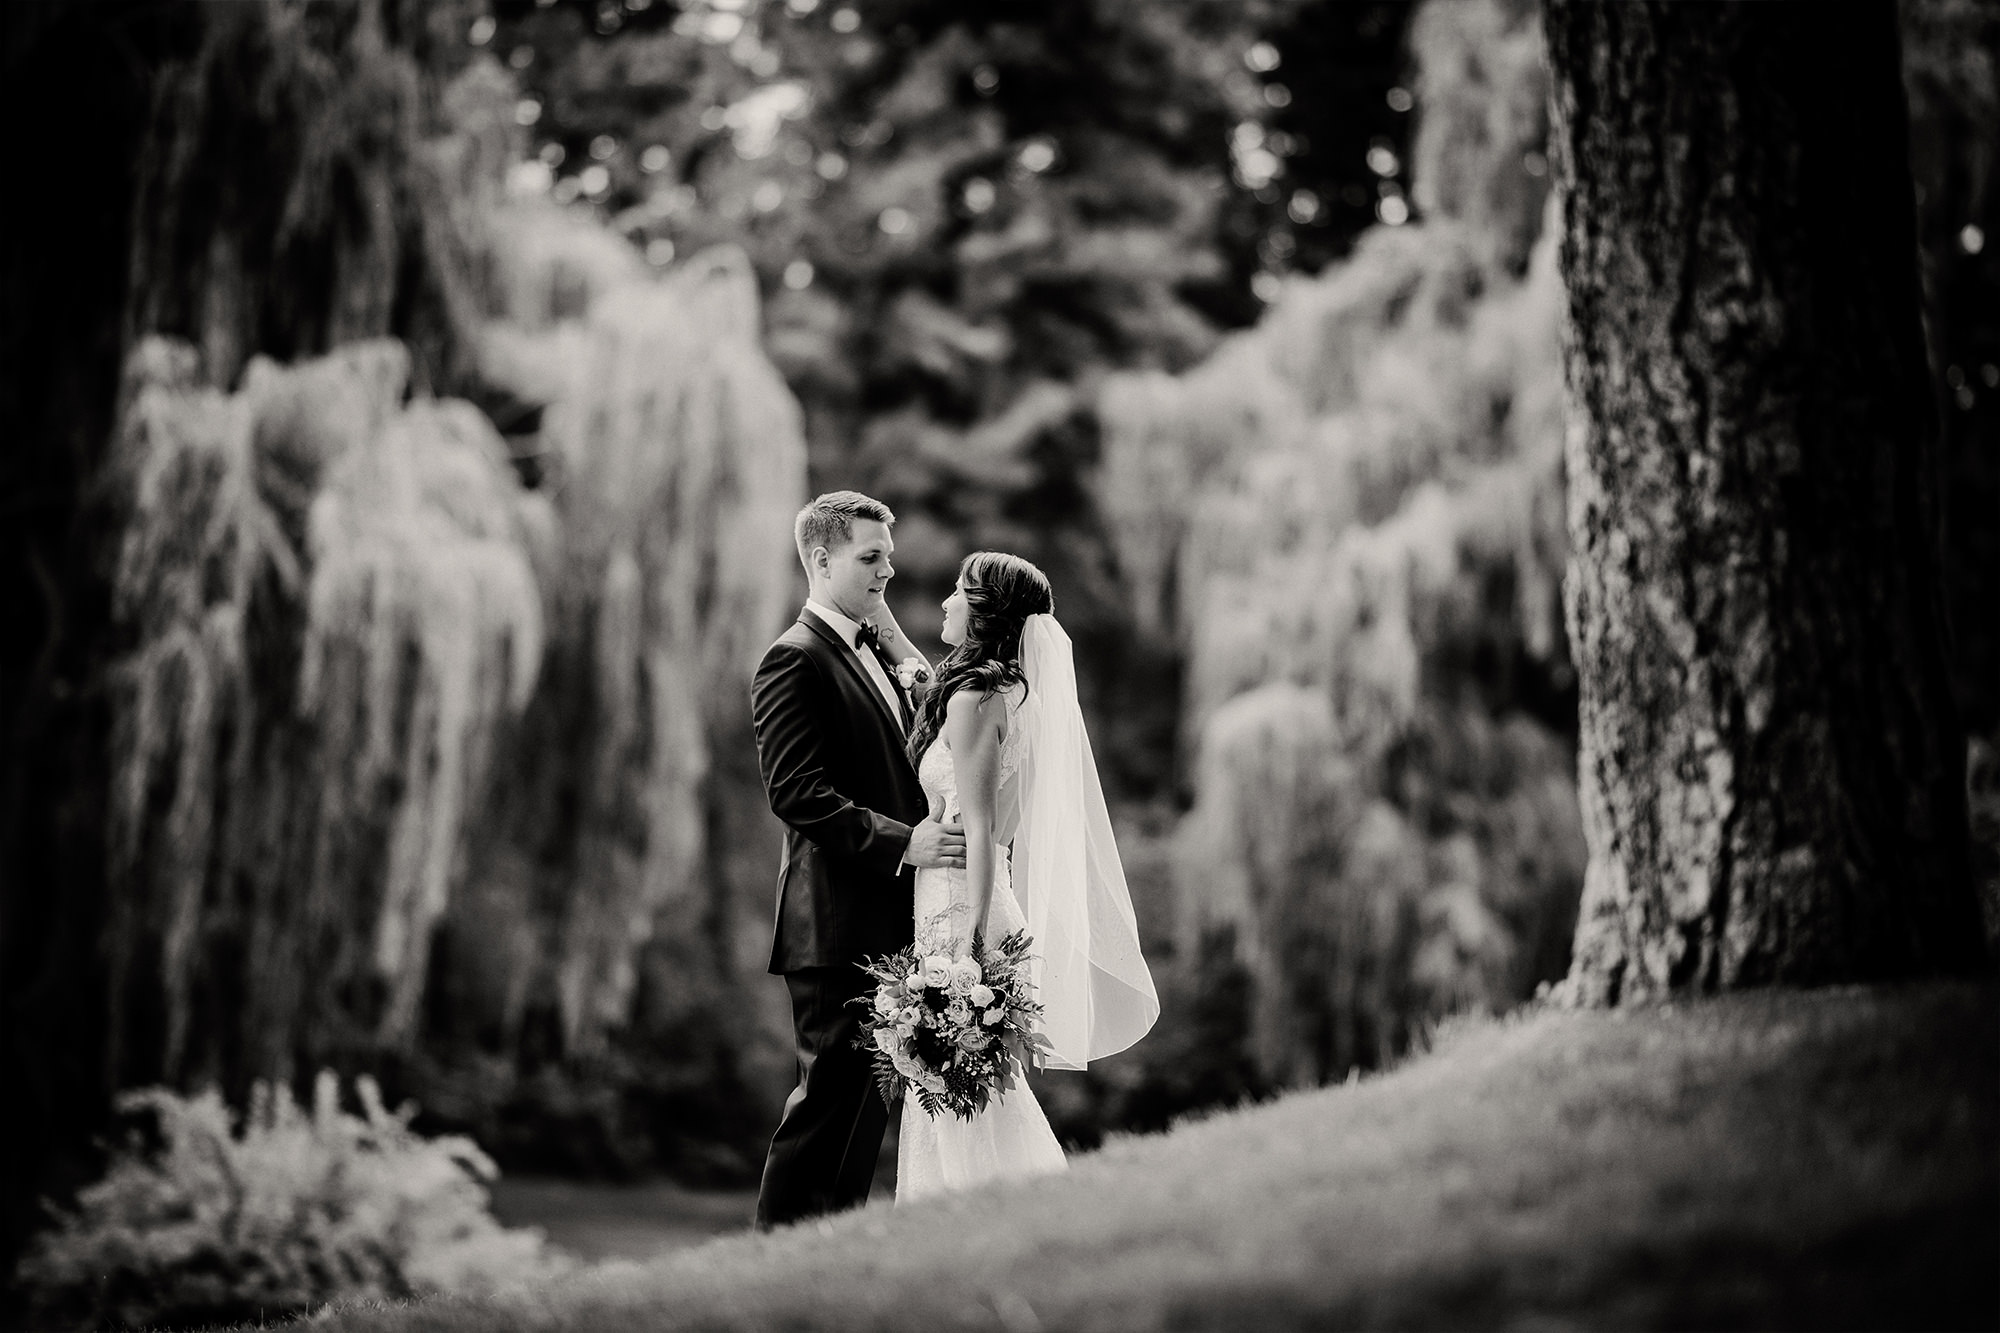 Beautiful monochrome image of a bride and groom in park with trees